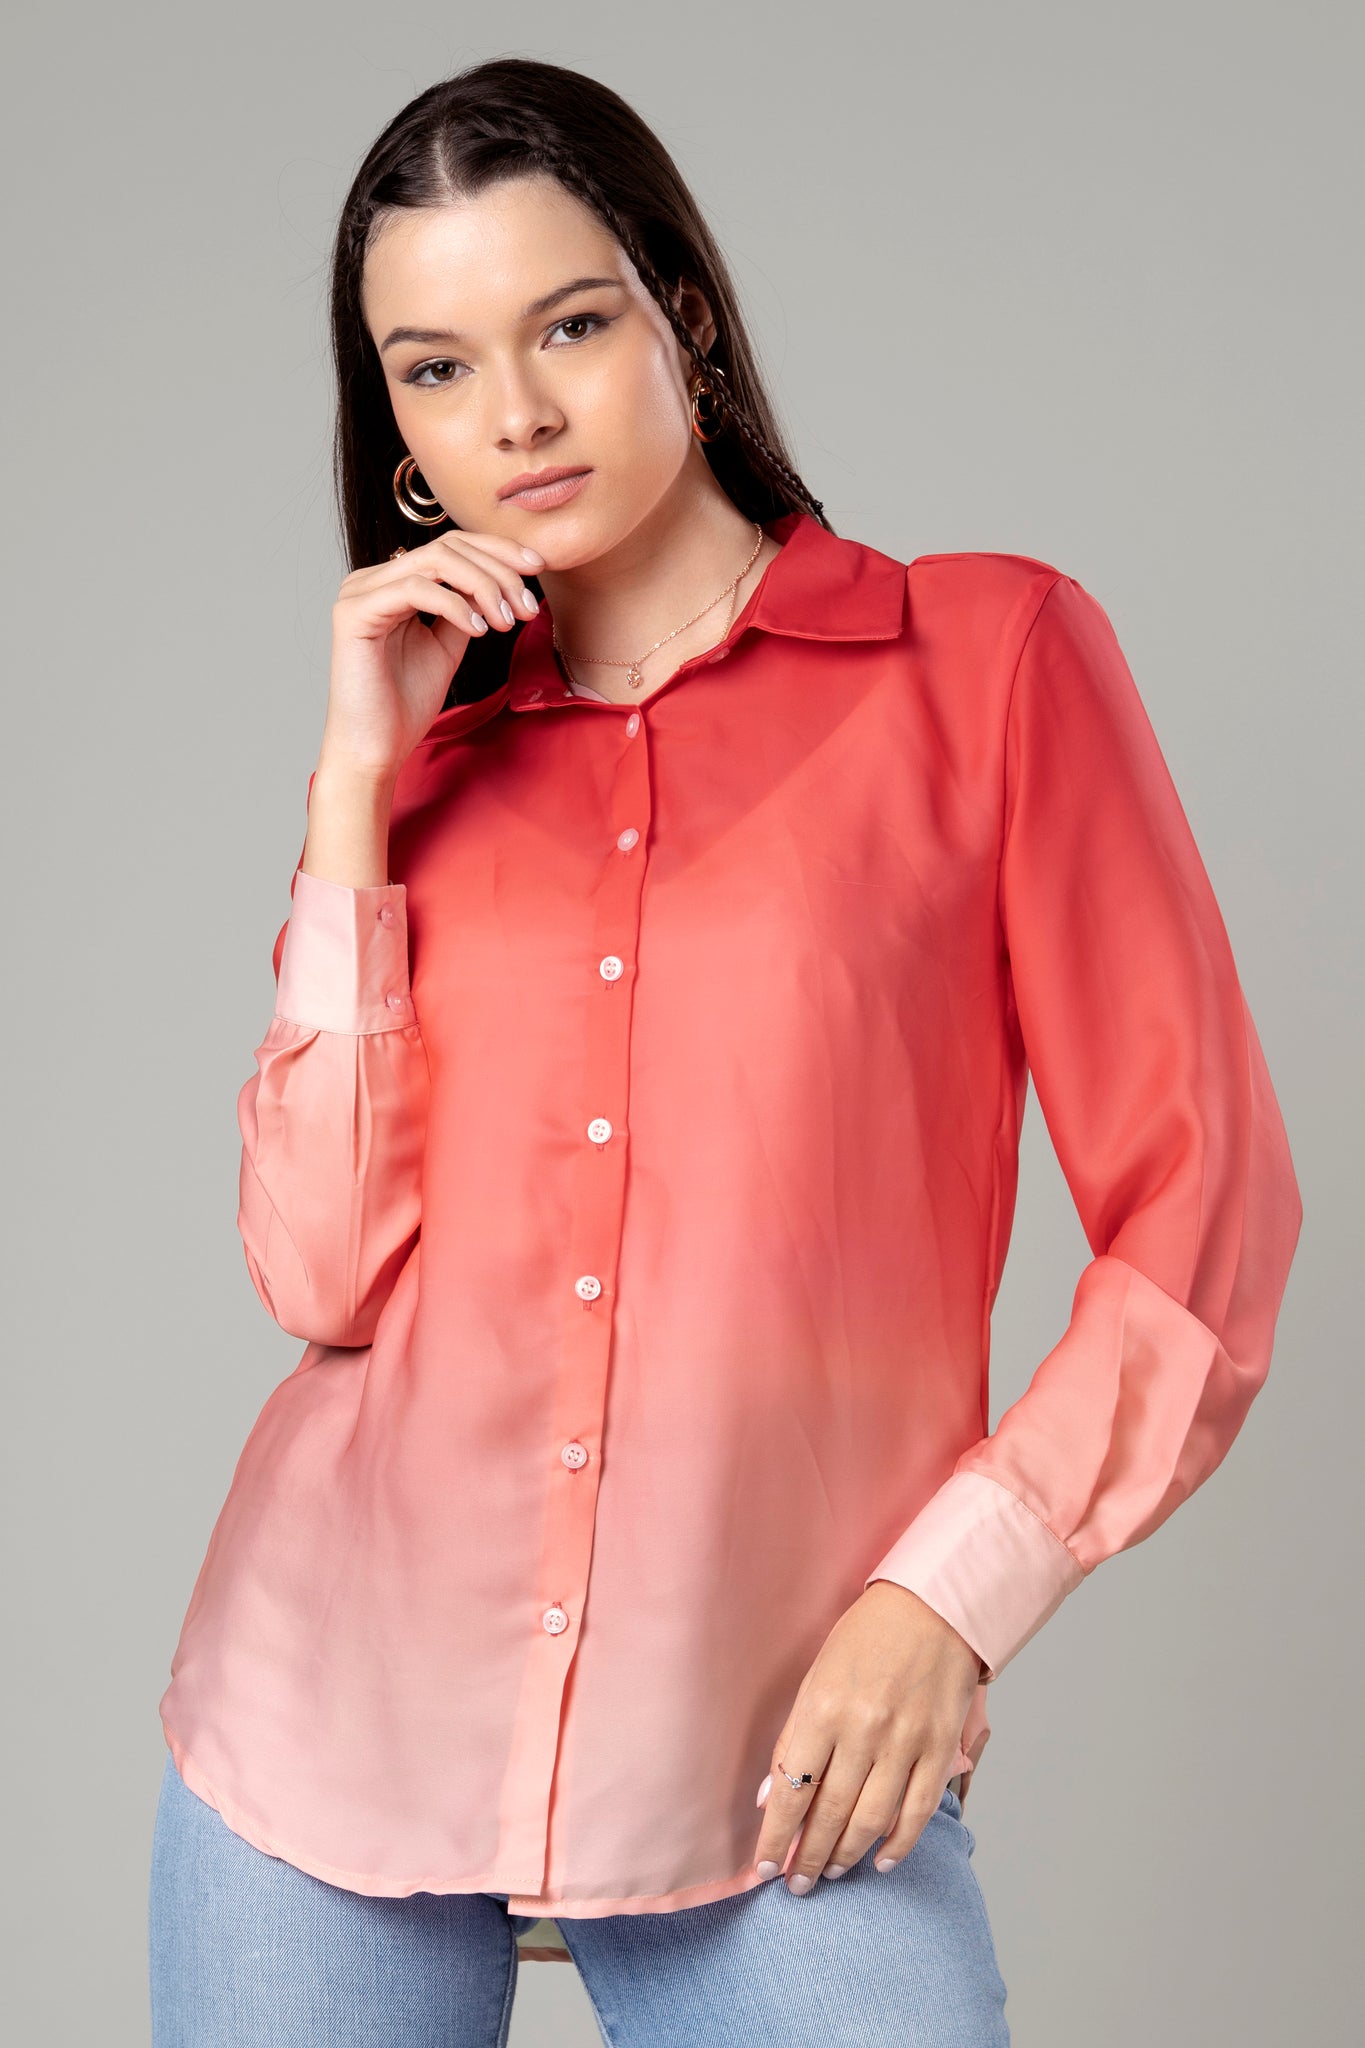 Trendy Red Ombre Shirt For Women